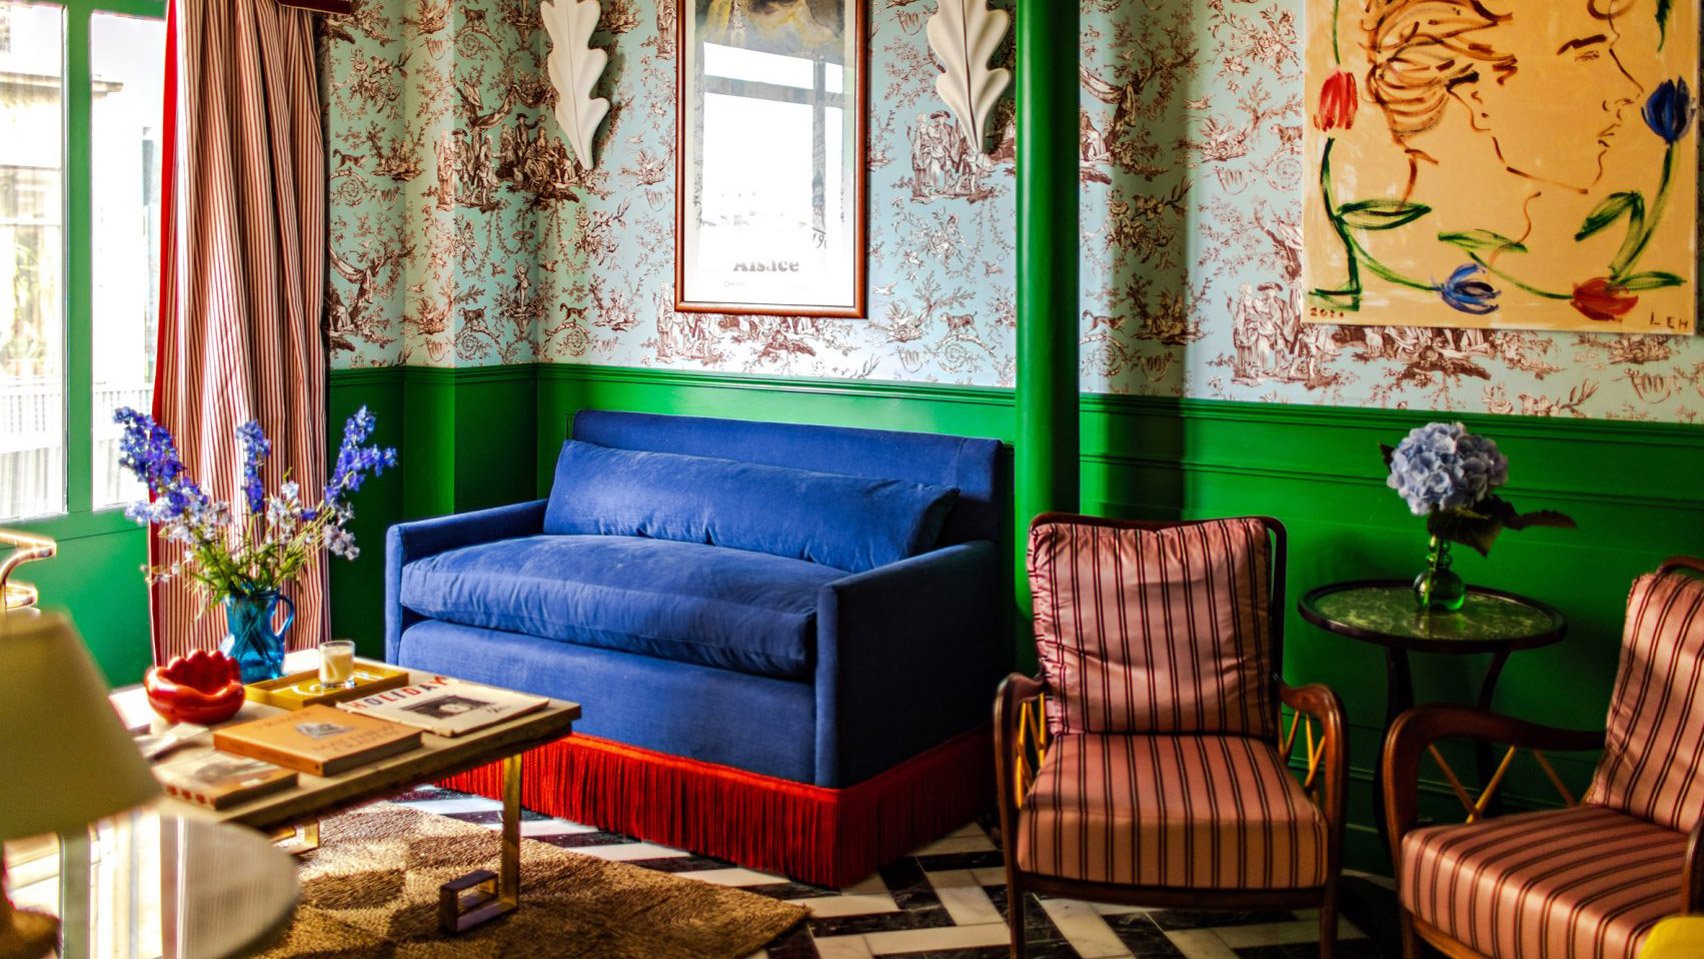 Interior trends for 2023 include maximalism and organic materials